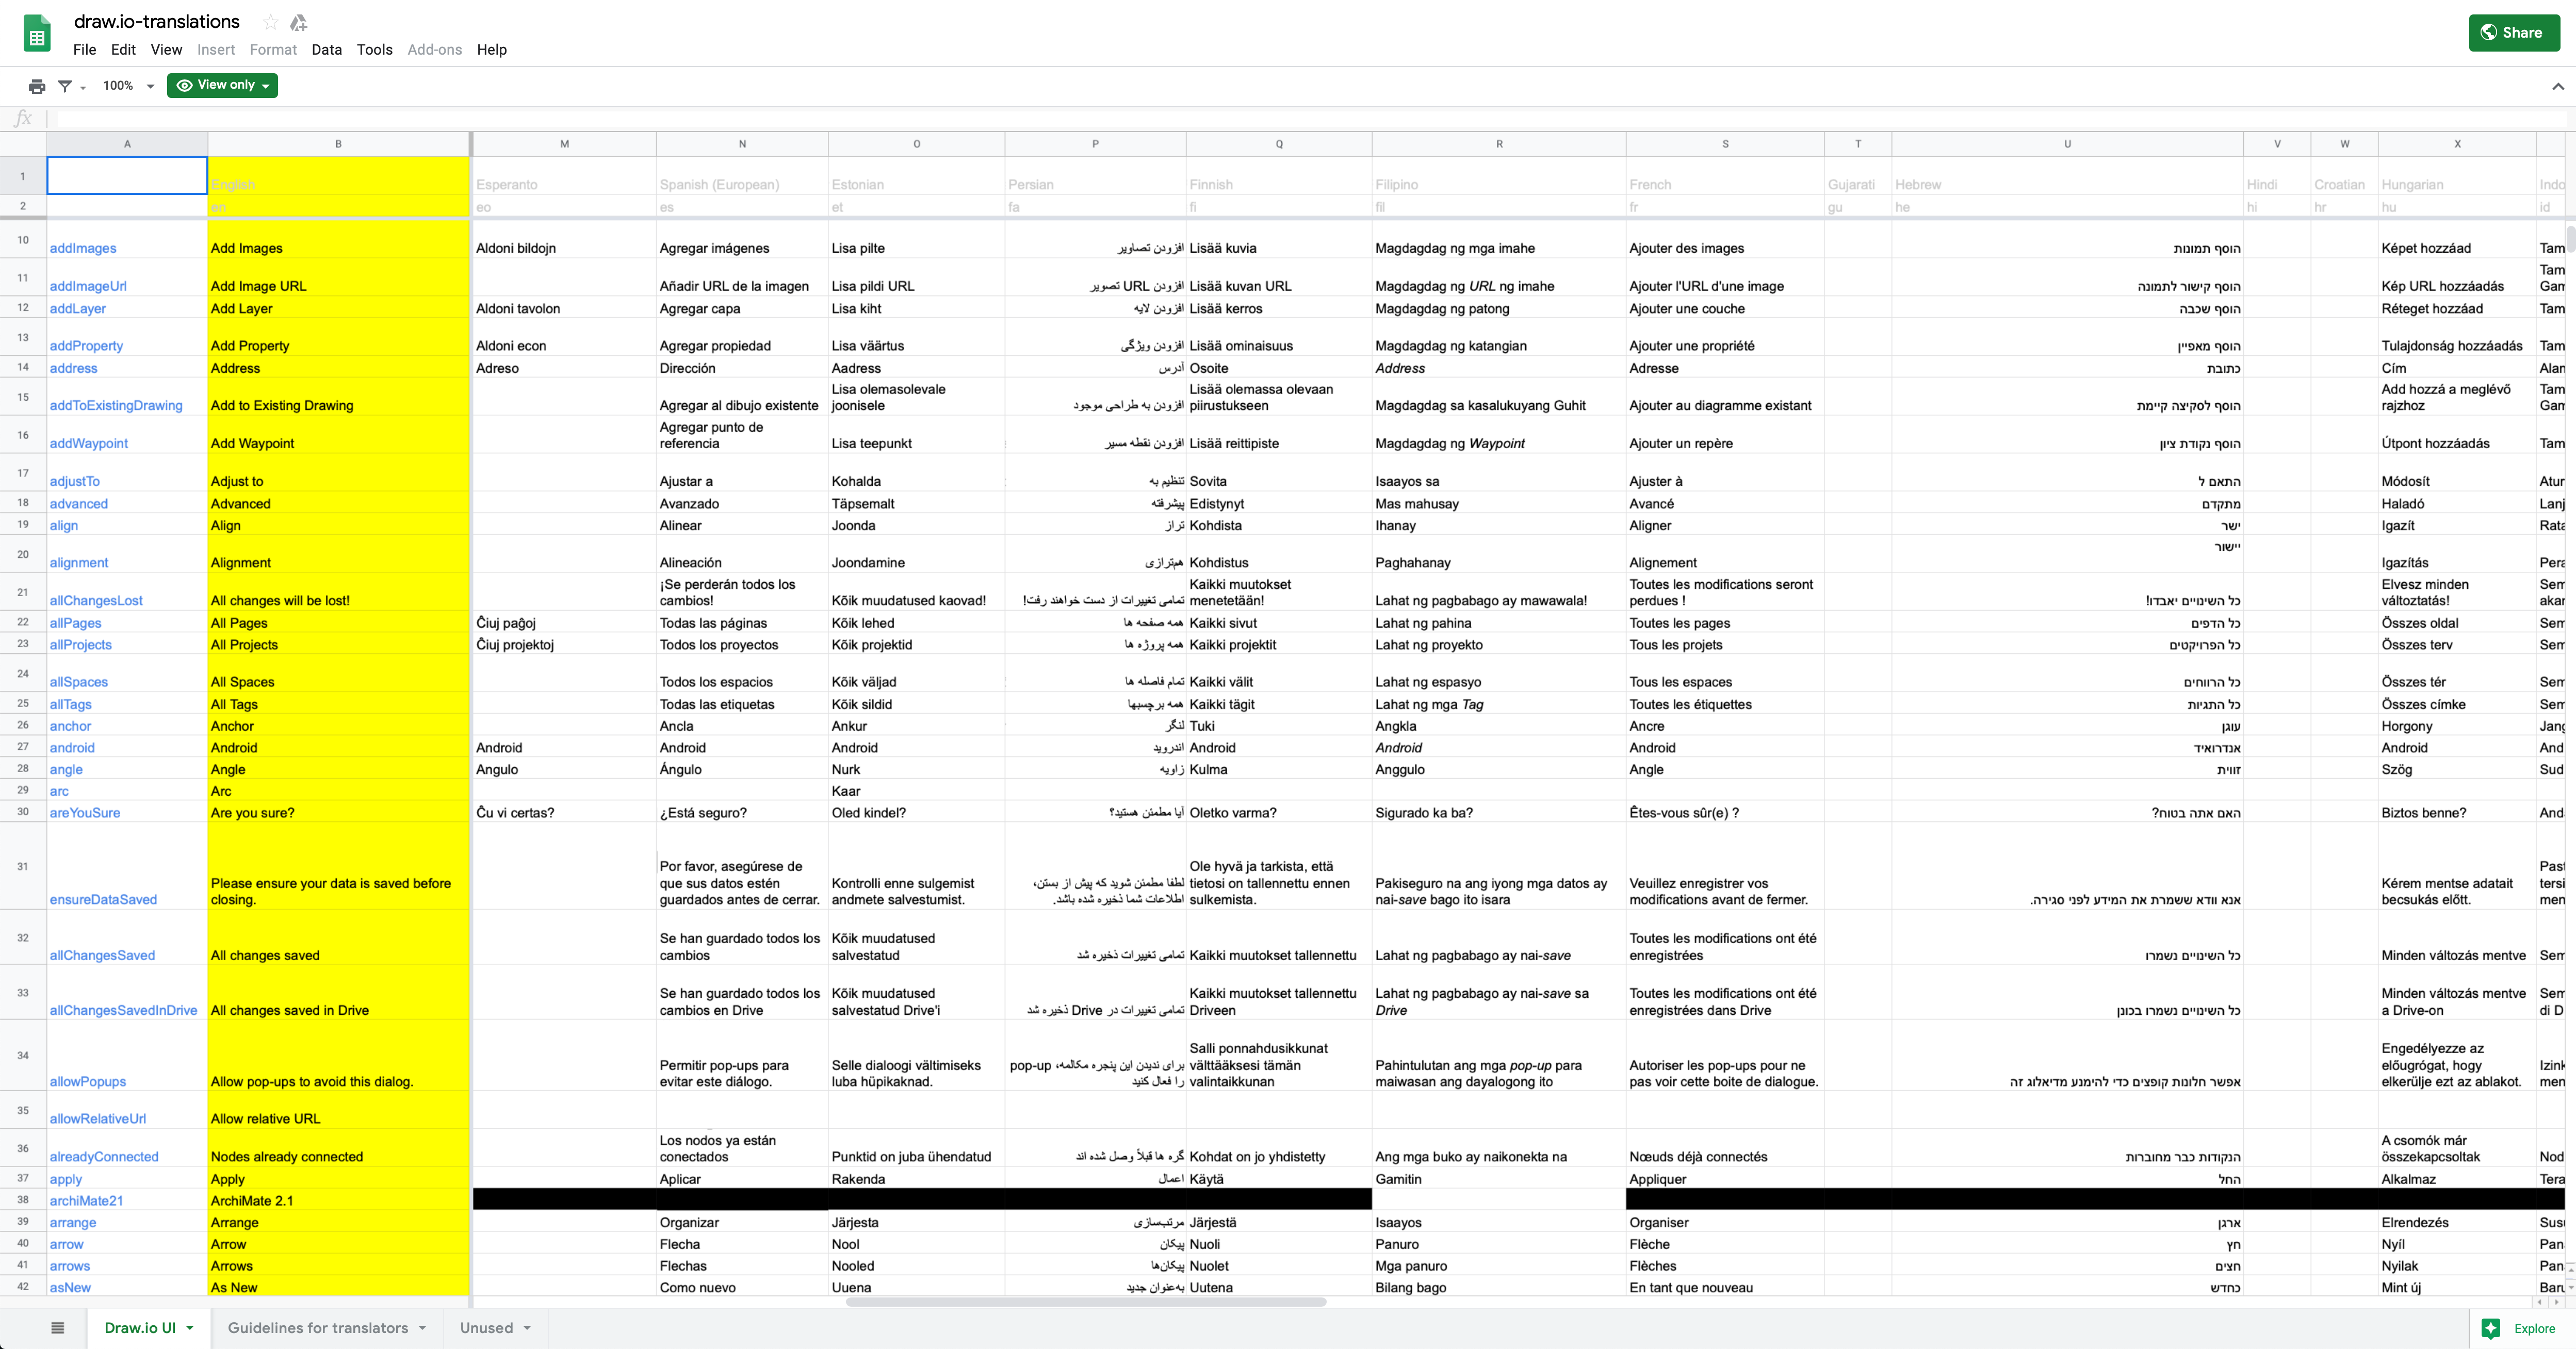 The draw.io UI languages in a Google sheet – let’s collect them all